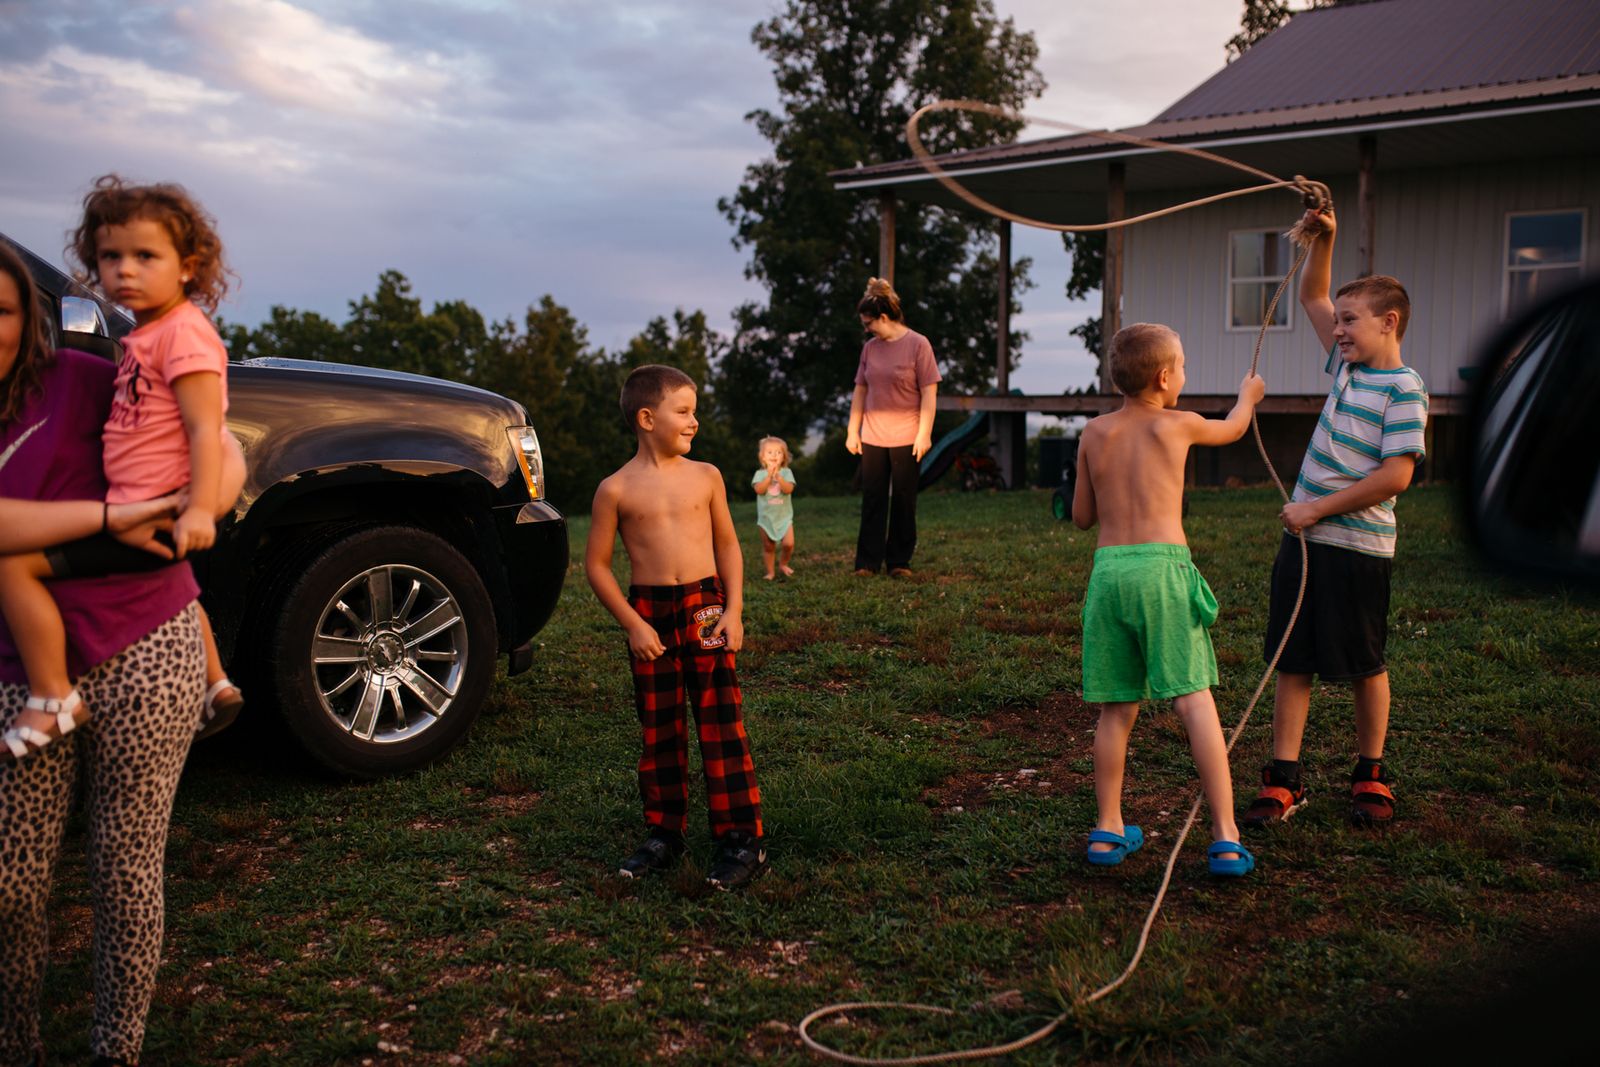 © Terra Fondriest - Image from the Growing Up Ozarks photography project